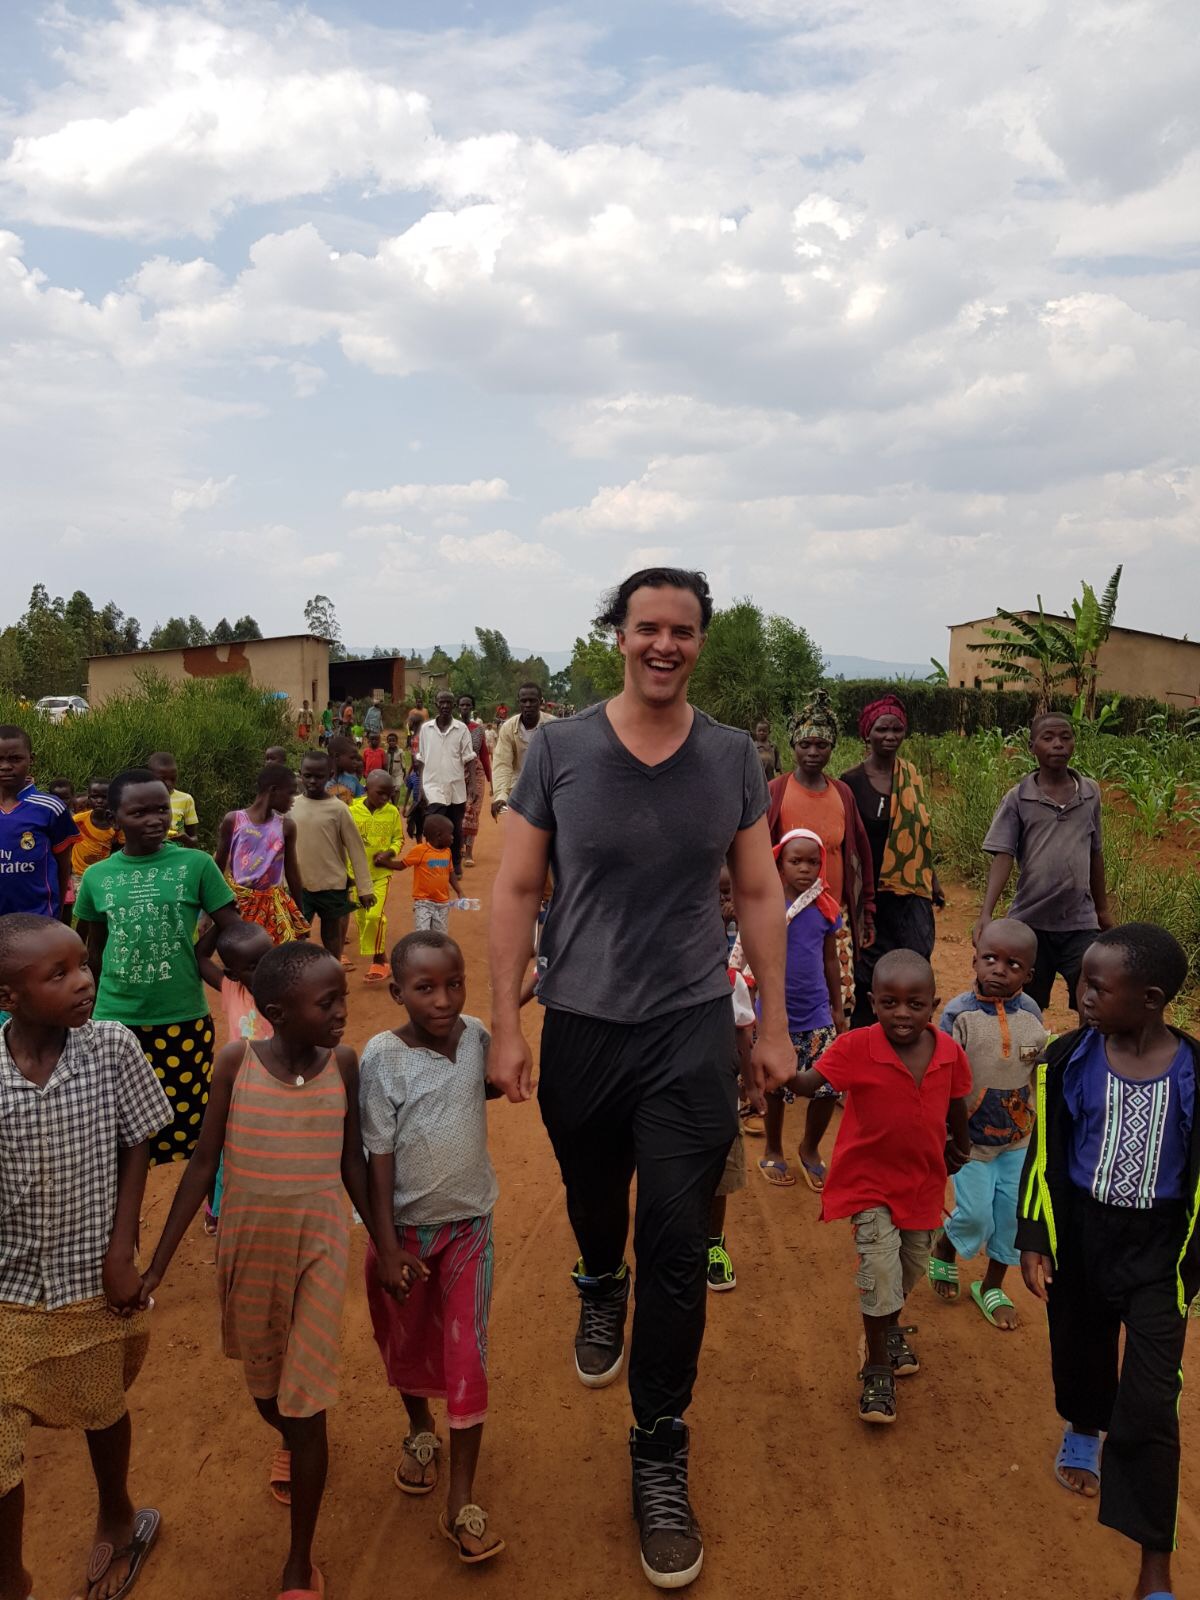 Built with bitcoin with families in Africa